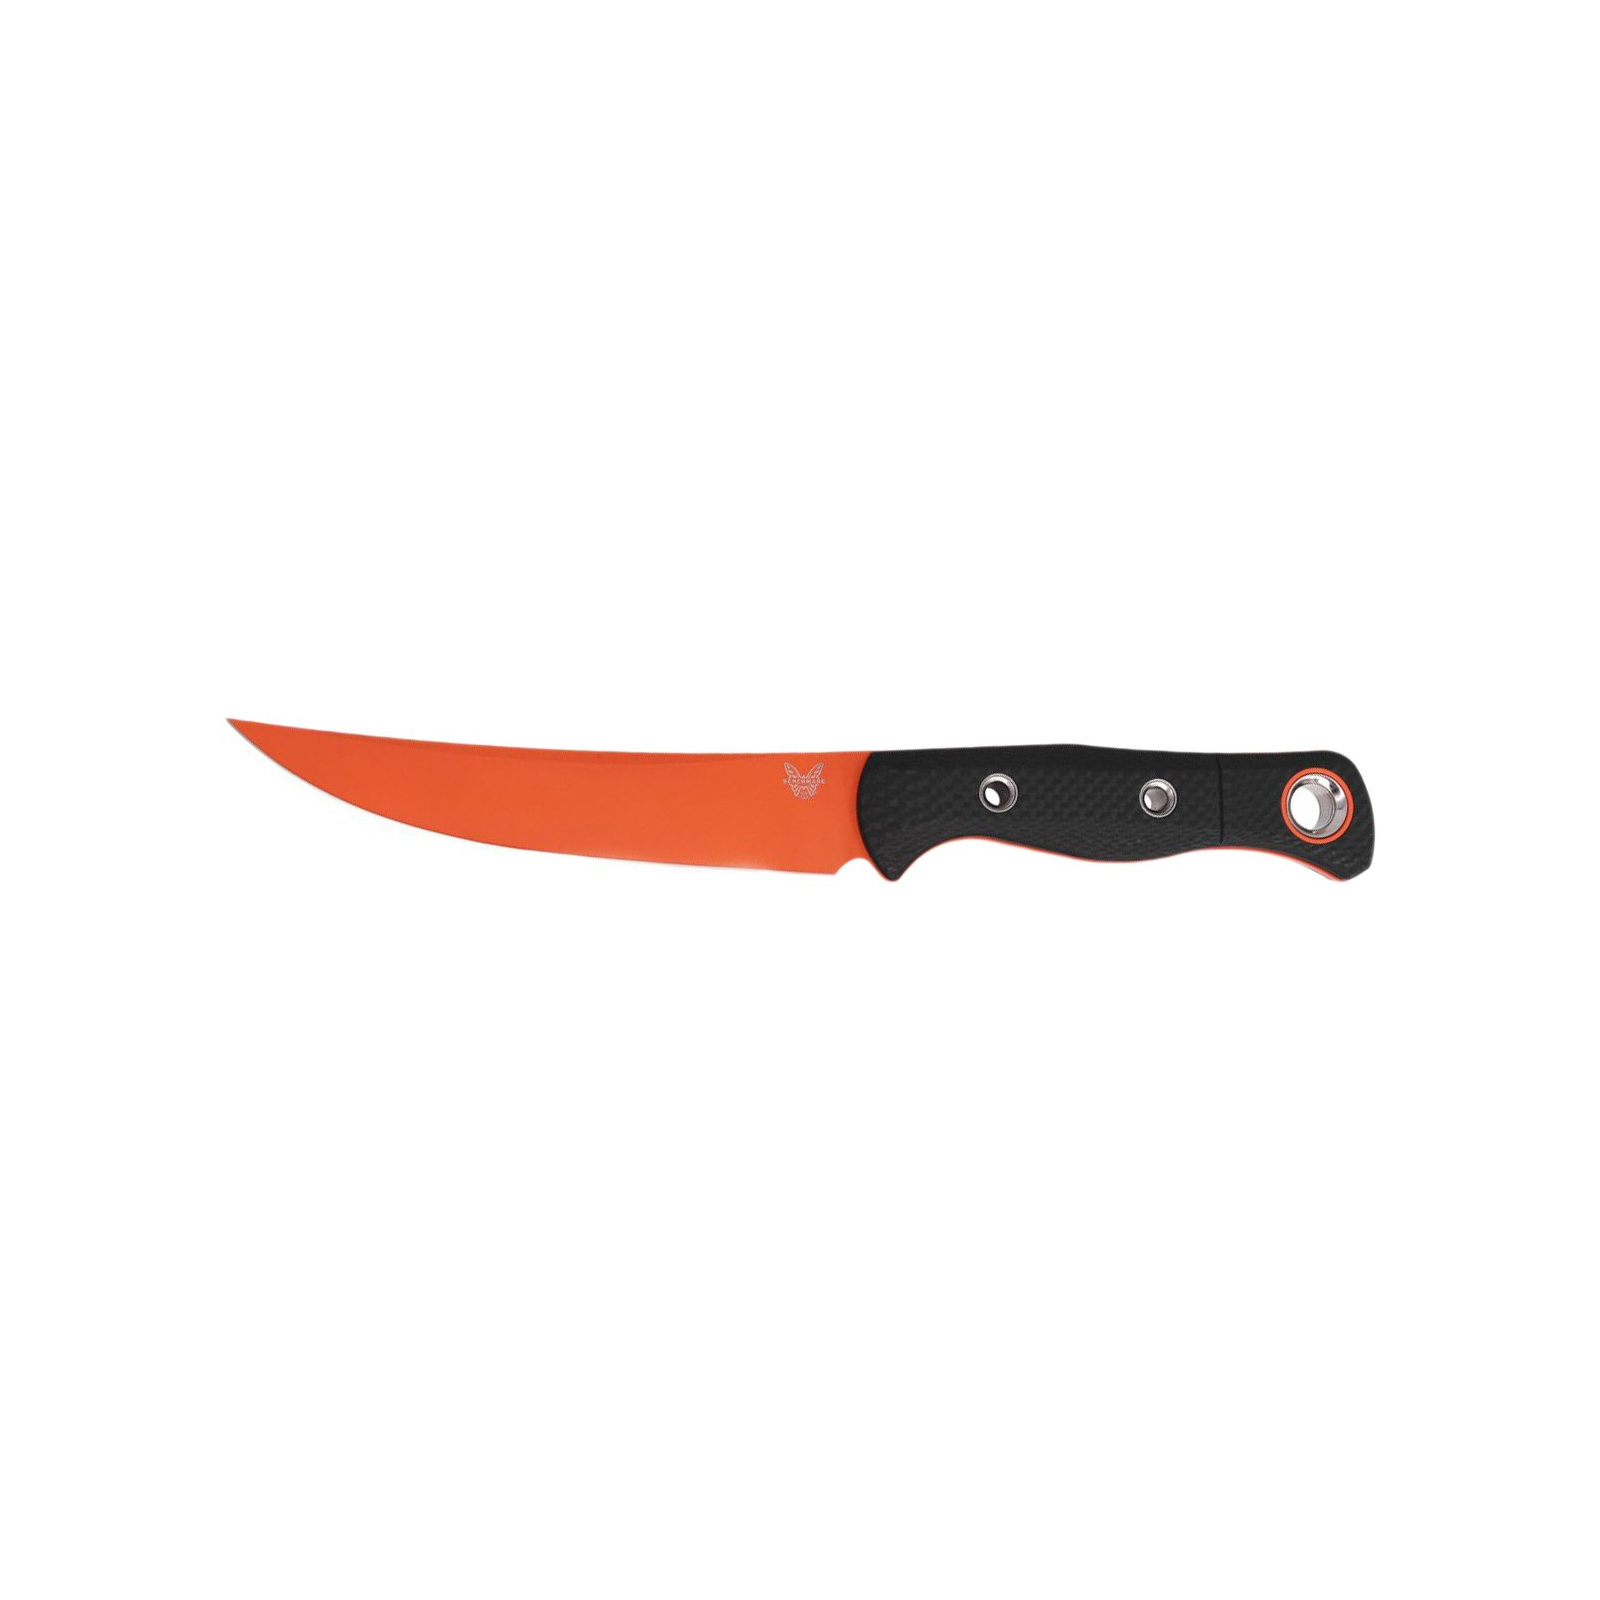 Нож Benchmade Meatcrafter Orange CF (15500OR-2)